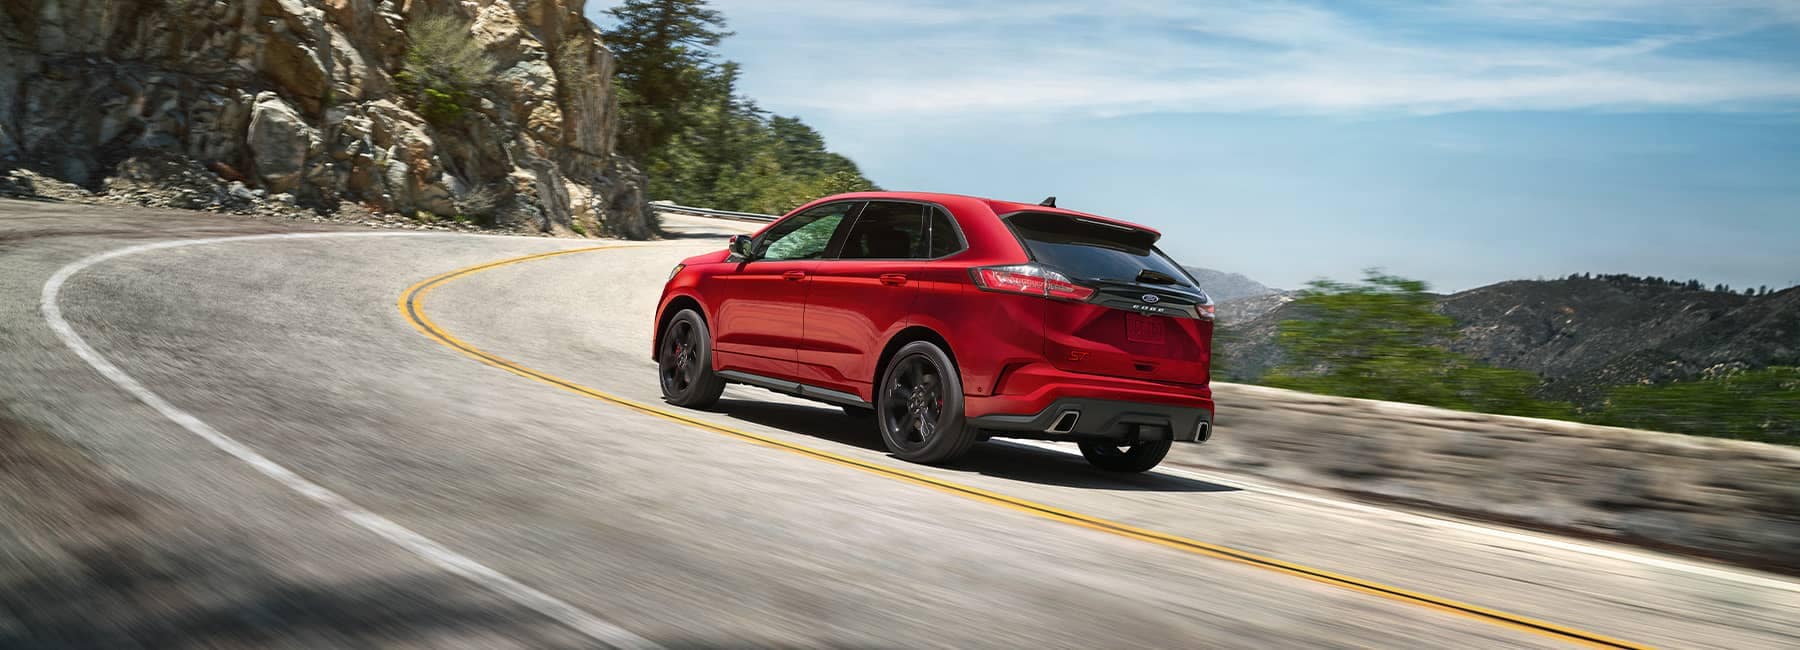 Red 2022 Ford Edge on a curving road